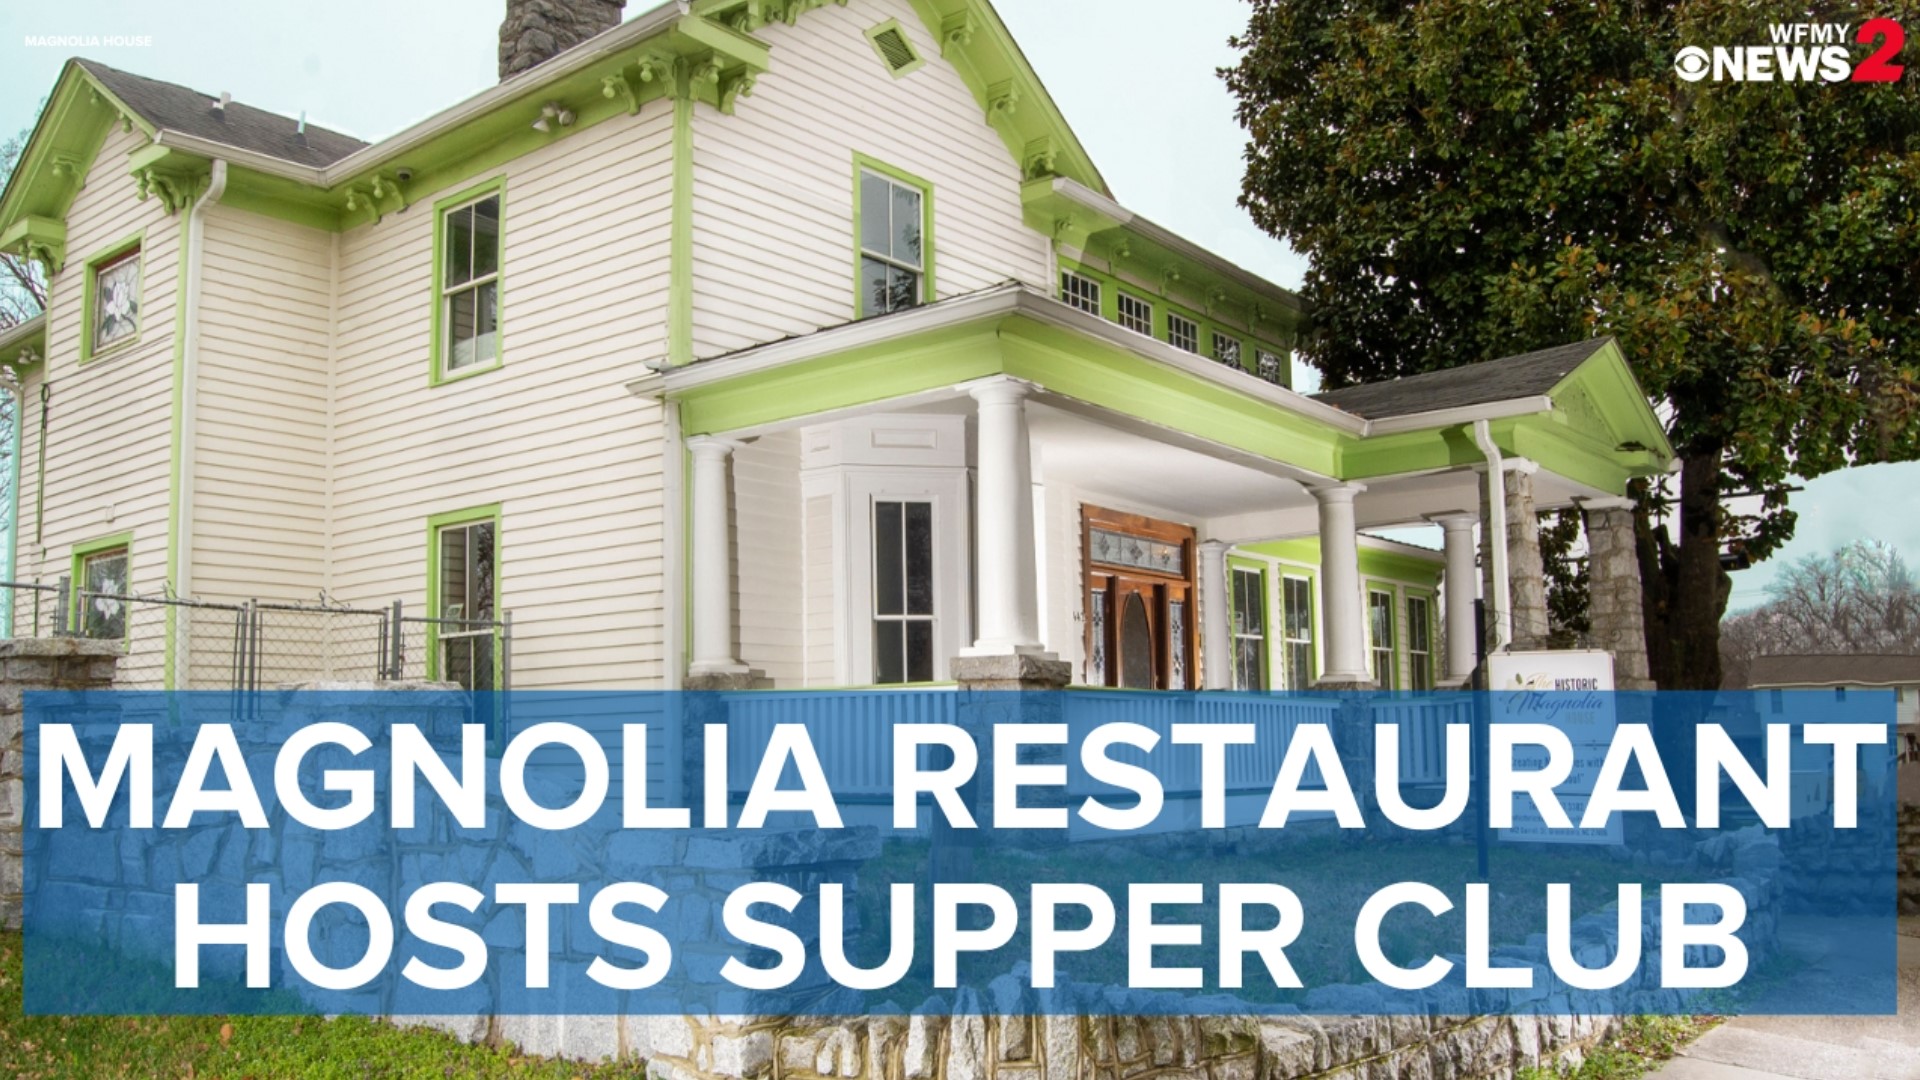 The historic Magnolia restaurant is hosting a supper club series featuring celebrity guests.